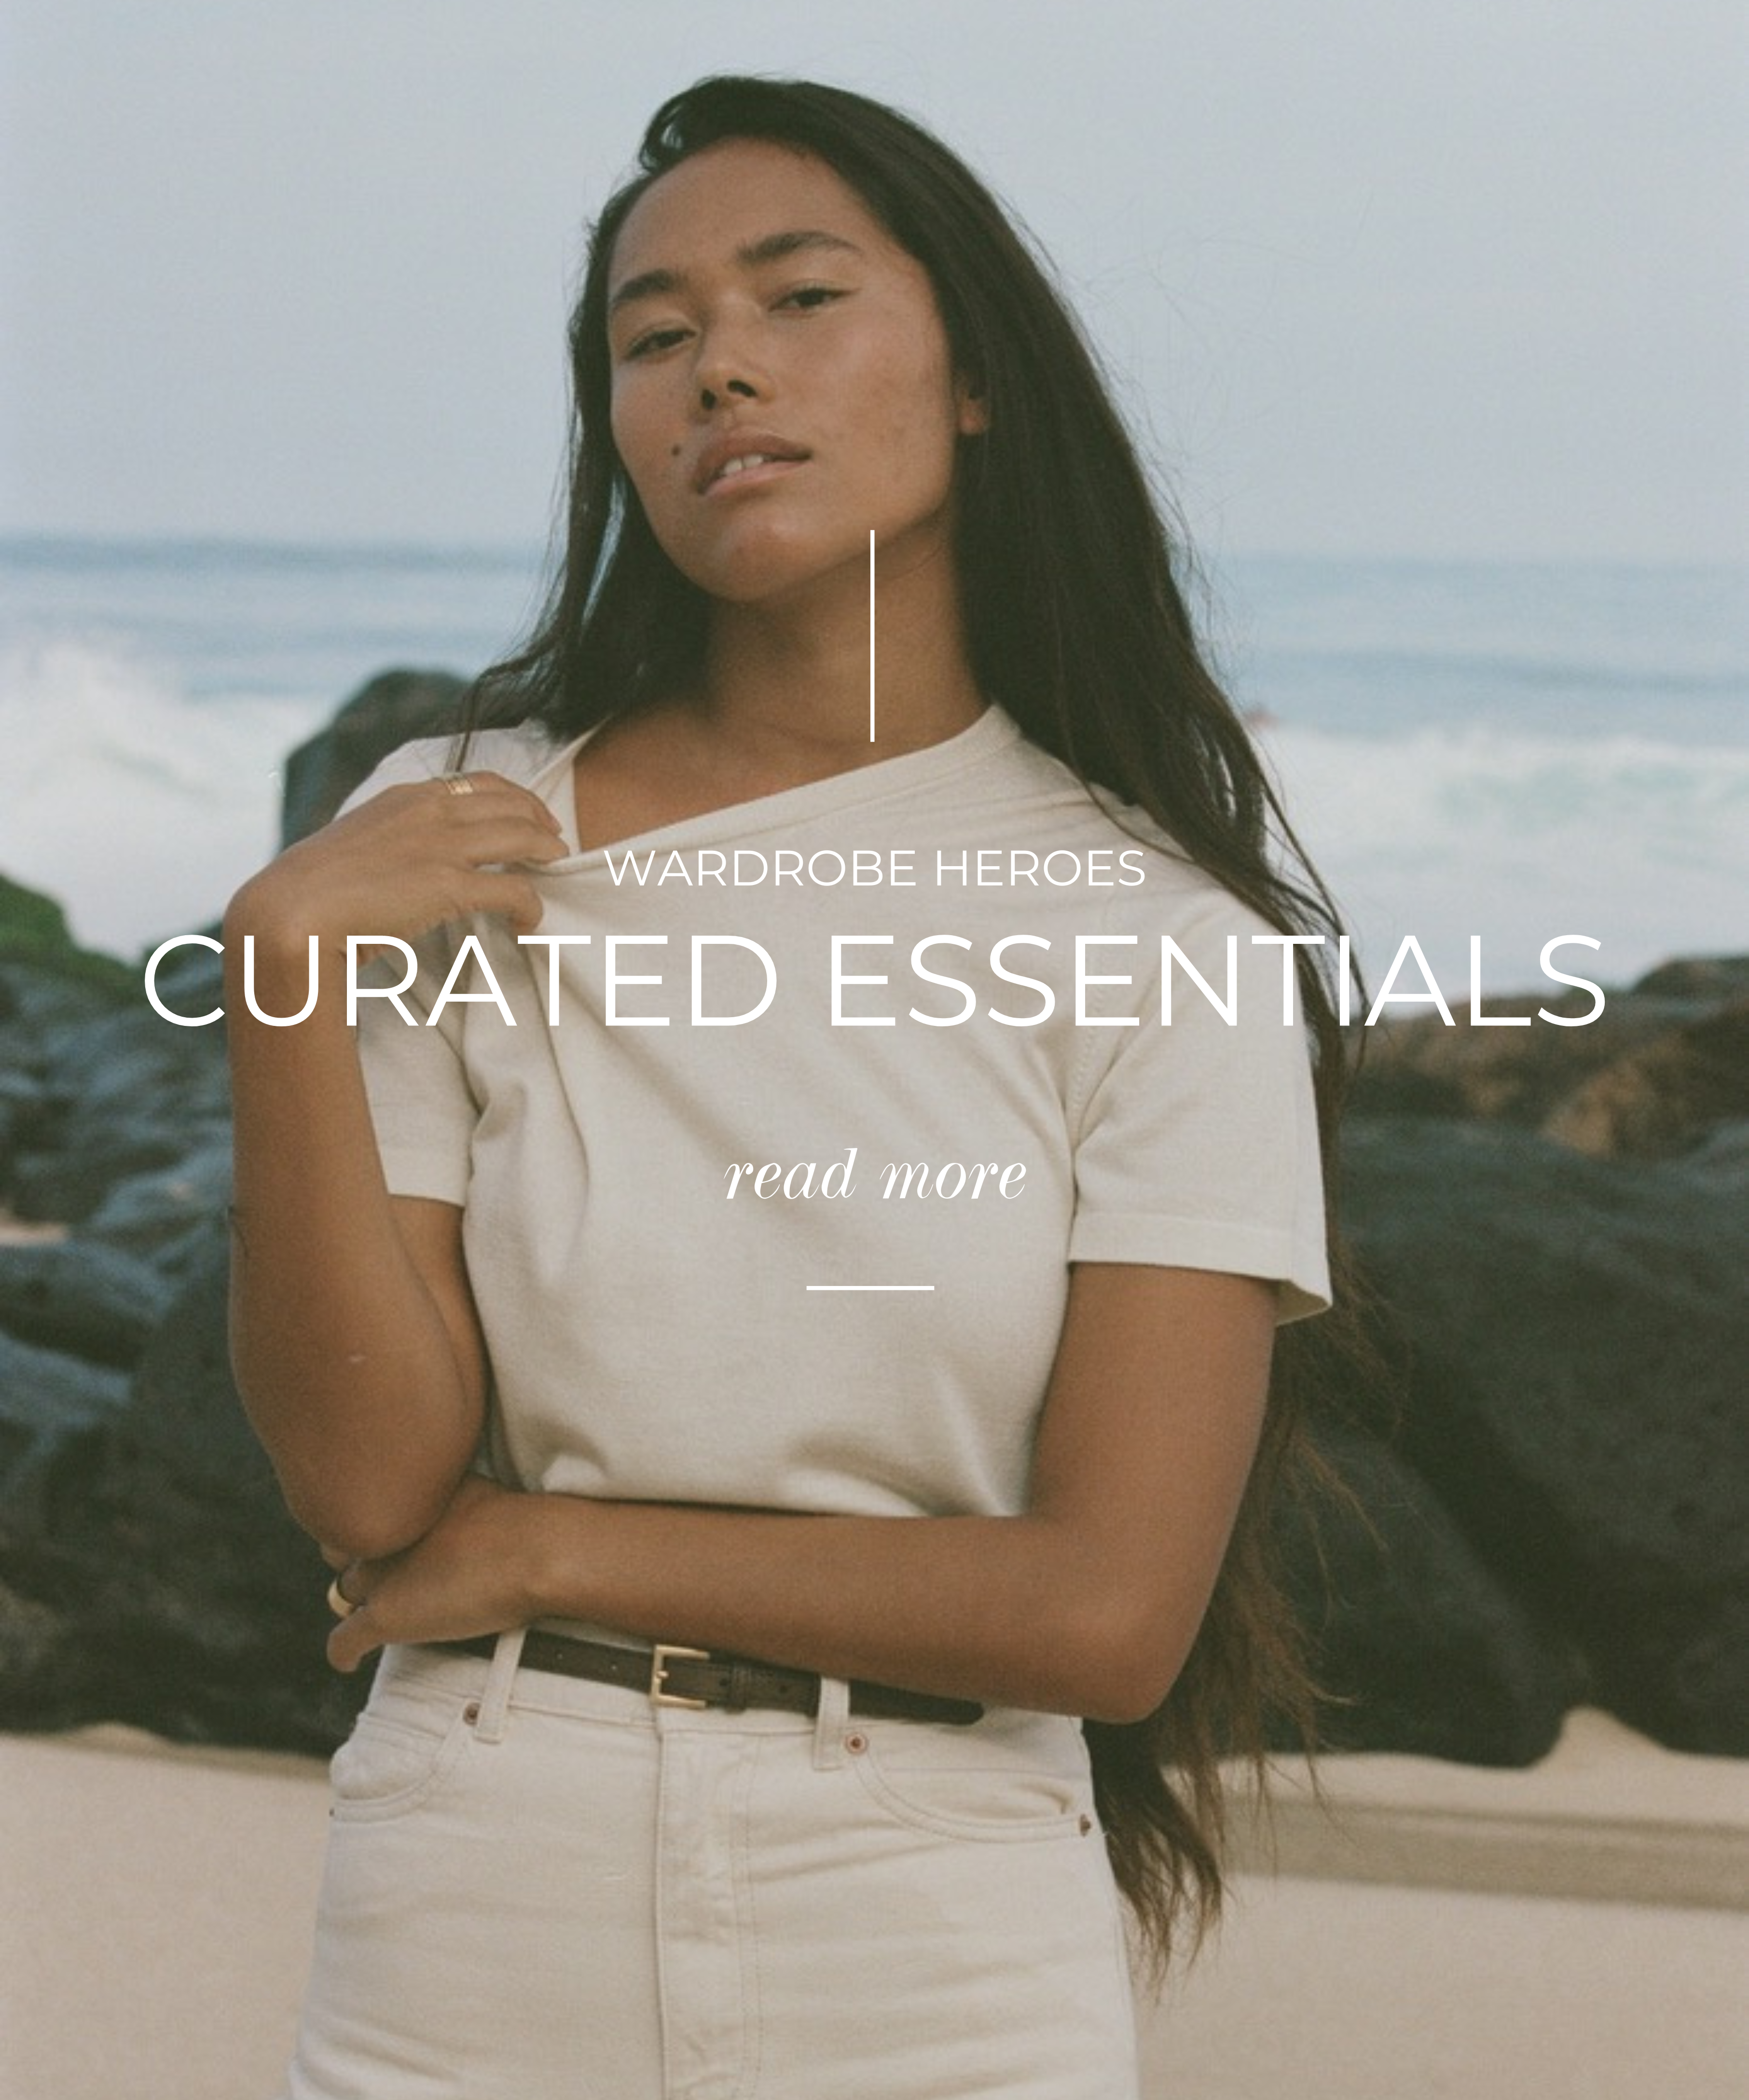 Introducing: Curated Essentials